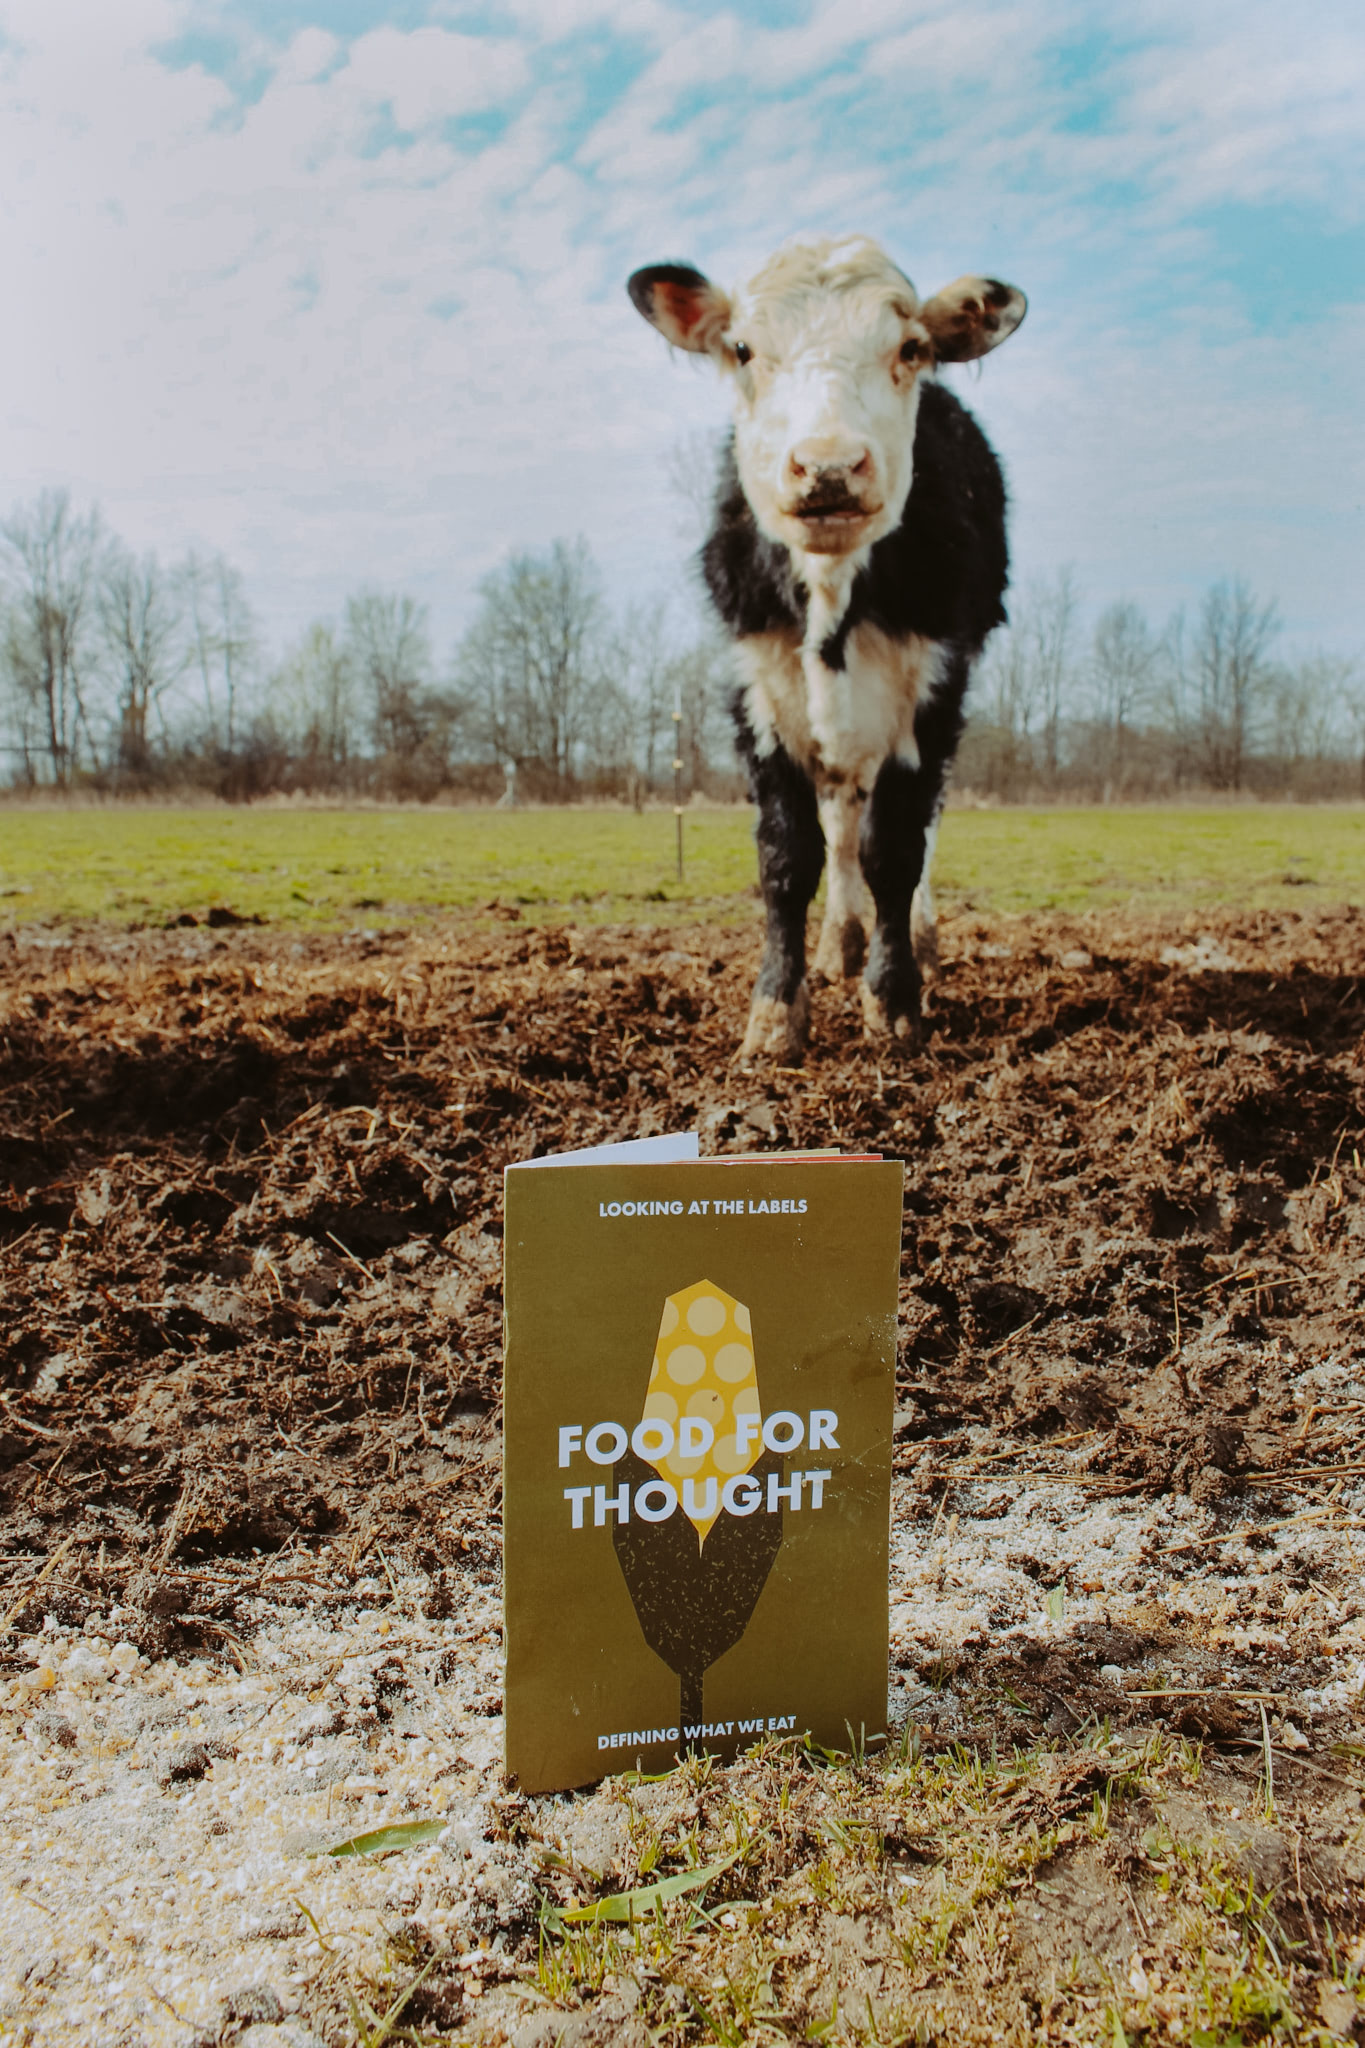 The book Food For Thought standing up in some mud with a cow in the background